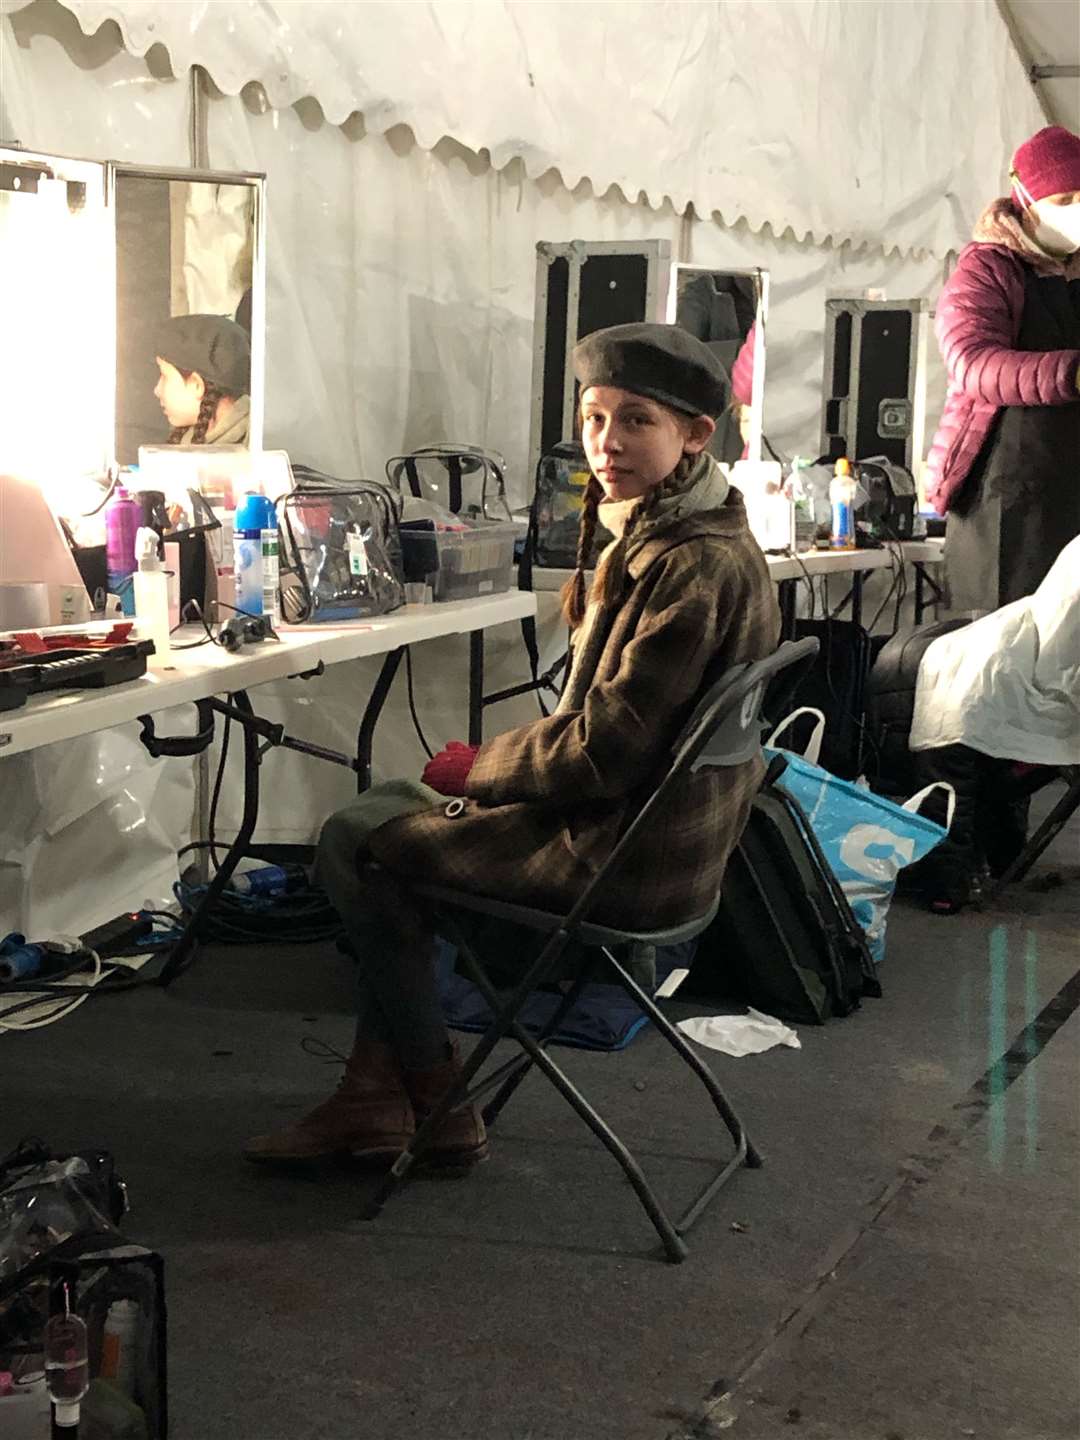 Sophie McDonnell (12), from Banff Academy, was on set as an extra in Peaky Blinders. She plays a young French/Canadian girl from the island of Miquelon.